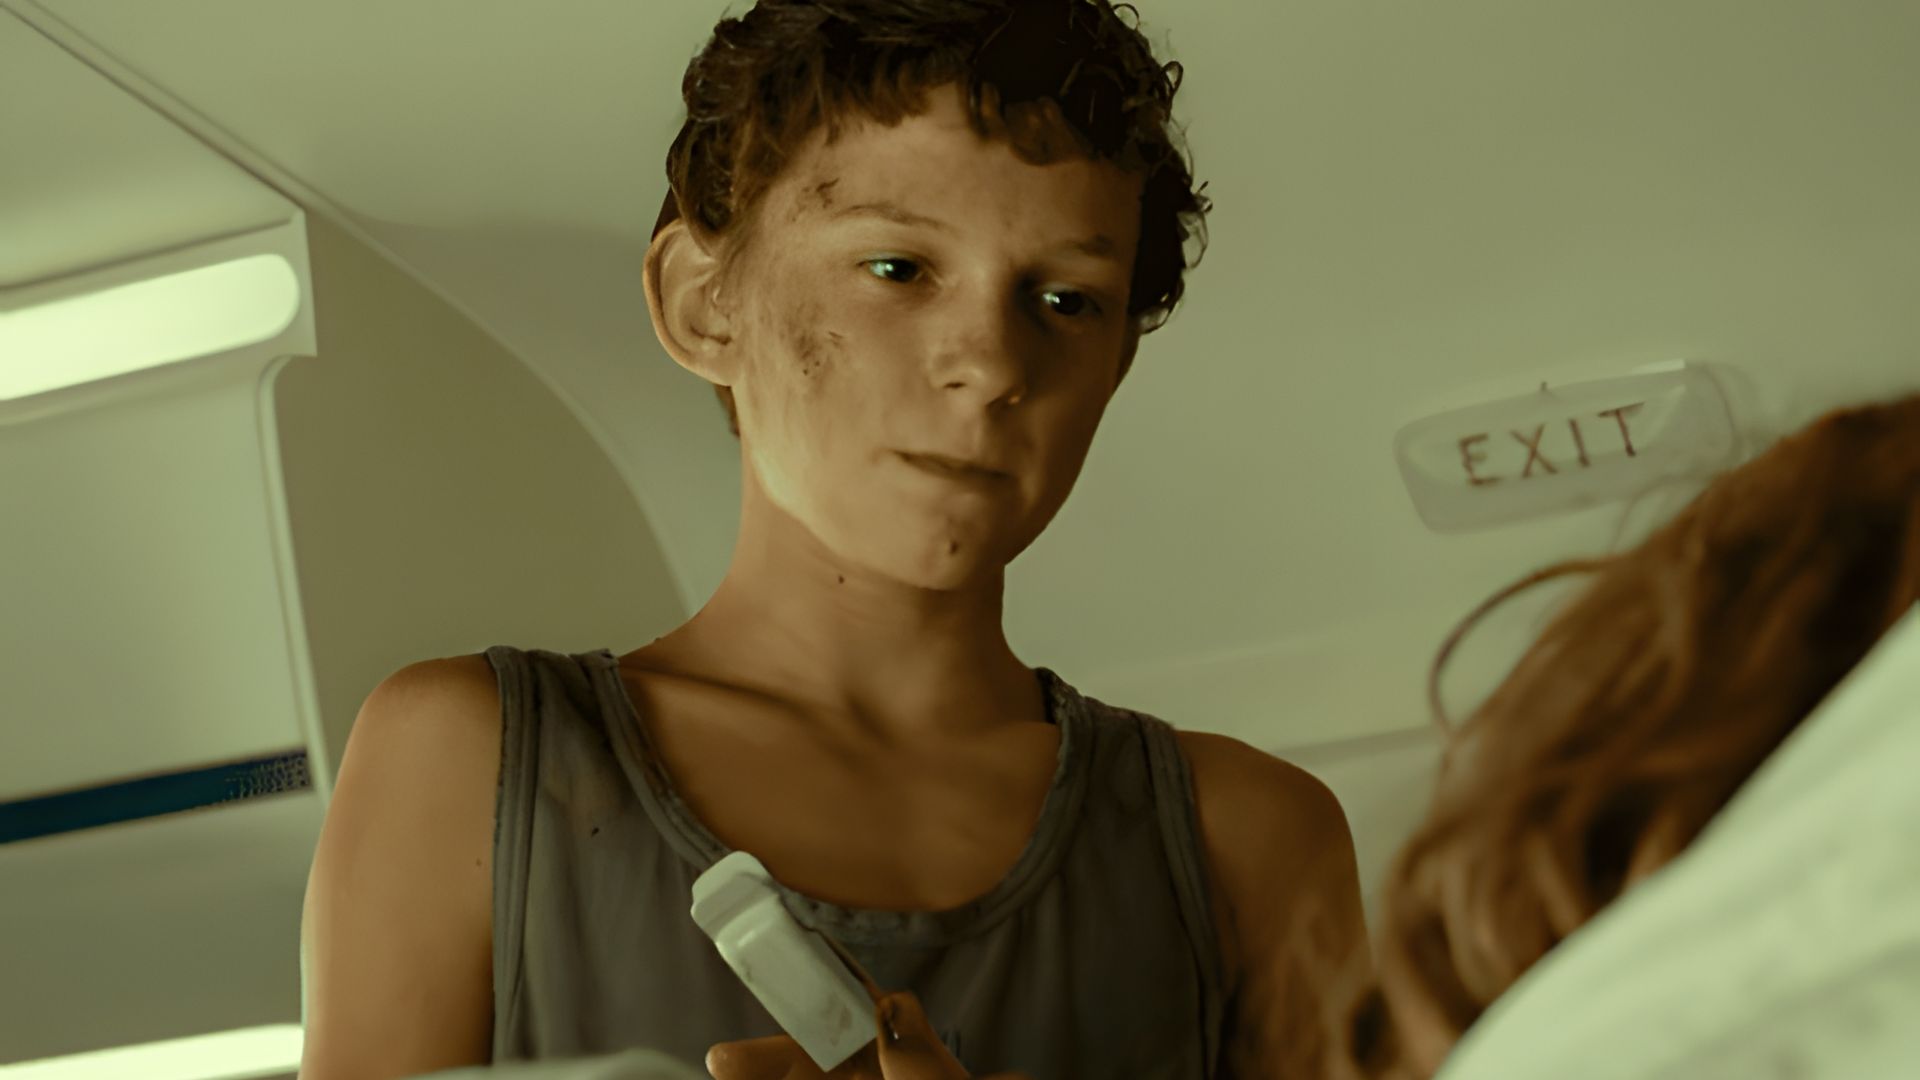 Tom Holland in the movie 'The Impossible'